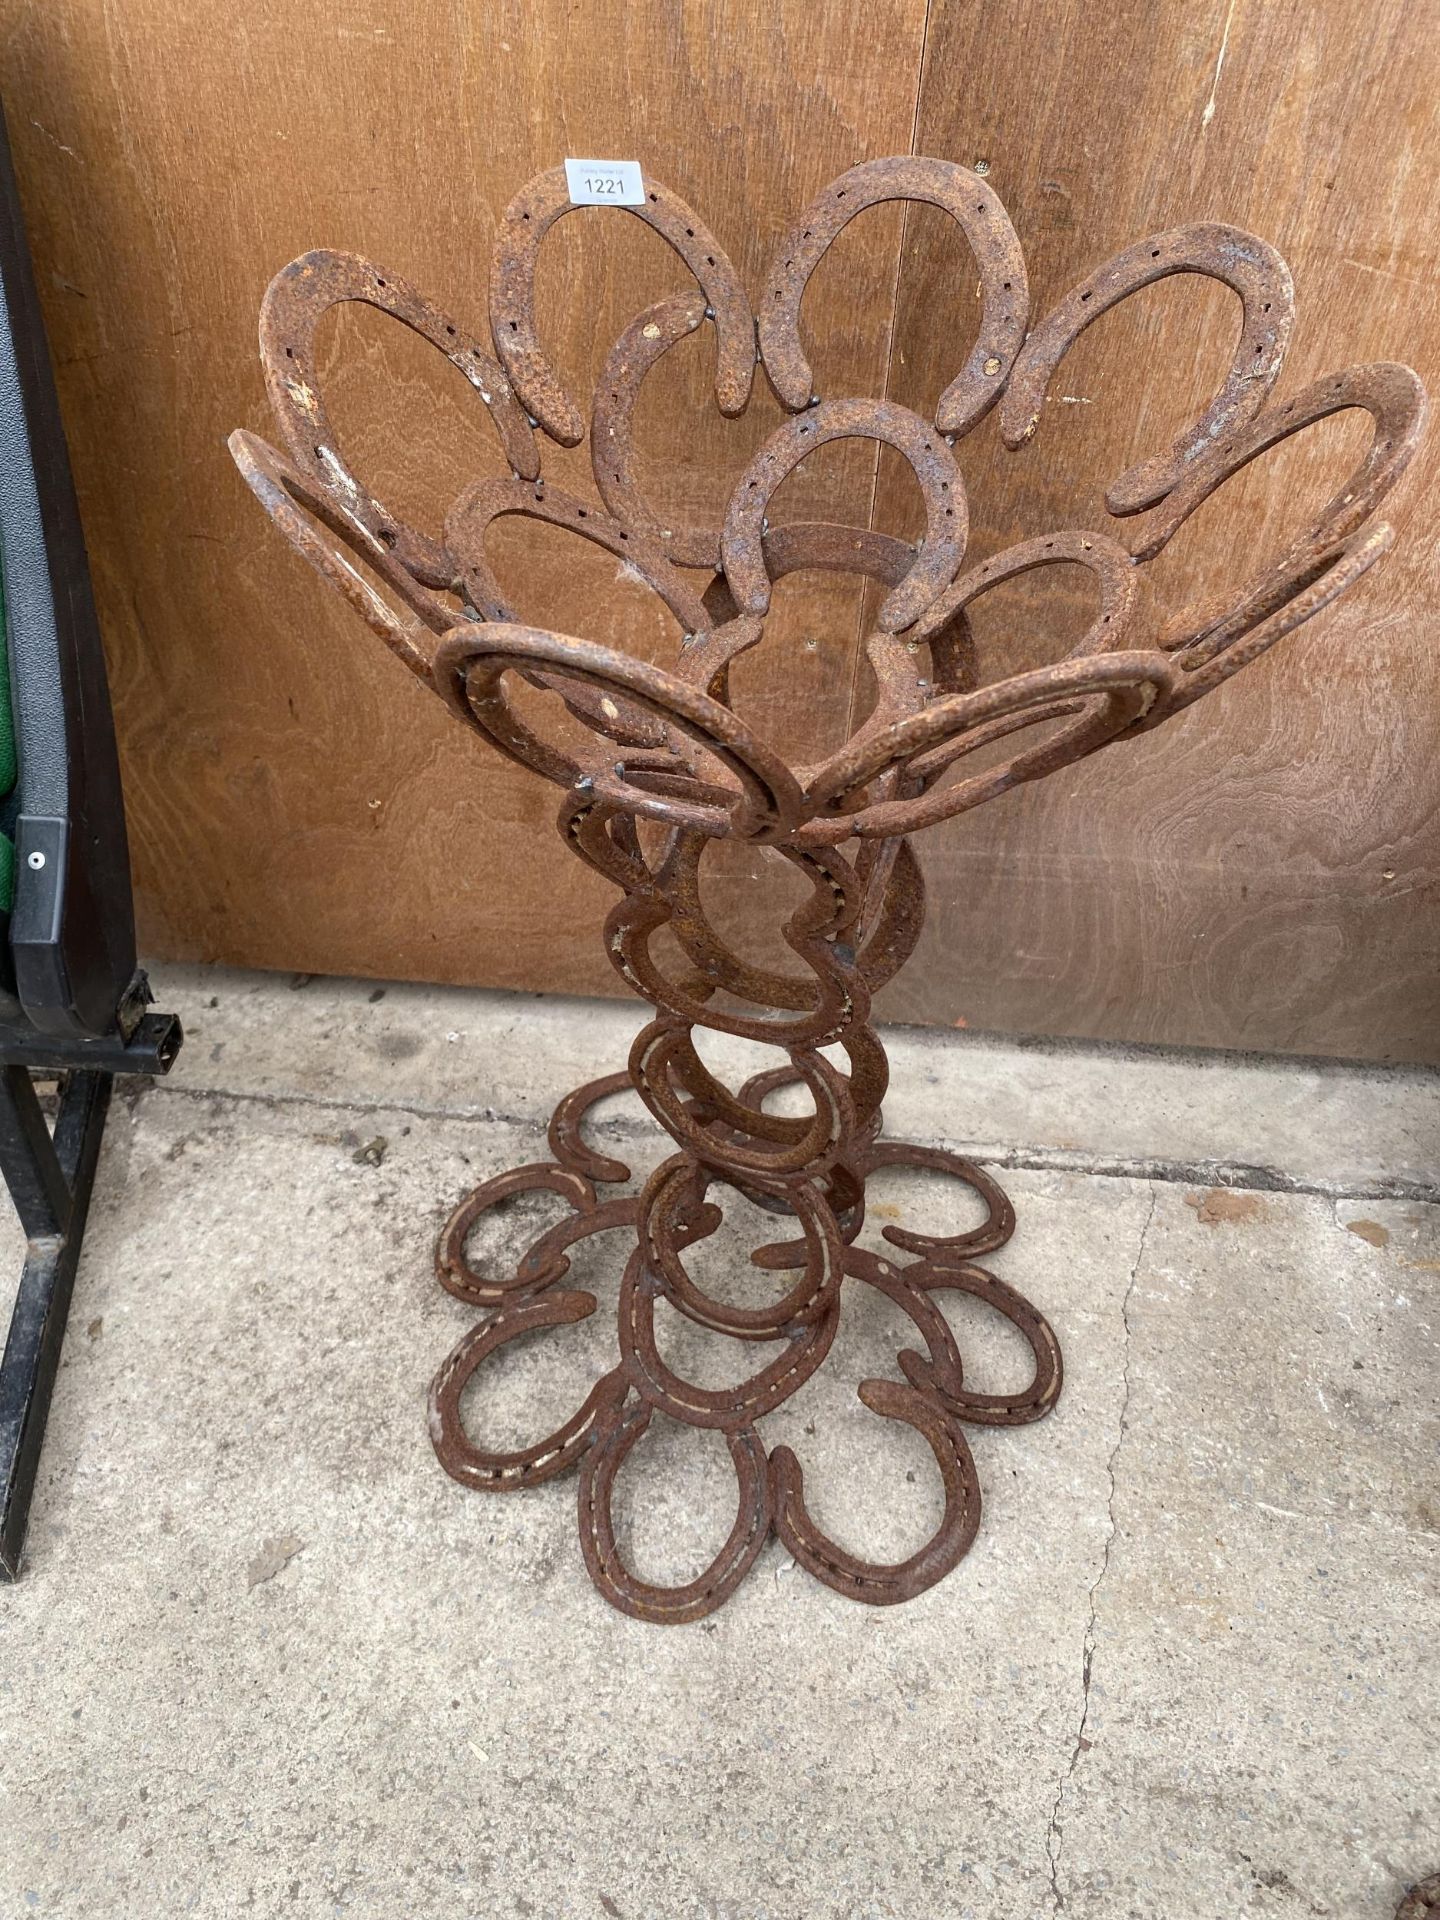 A DECORATIVE PLANTER FORMED FROM HORSE SHOES